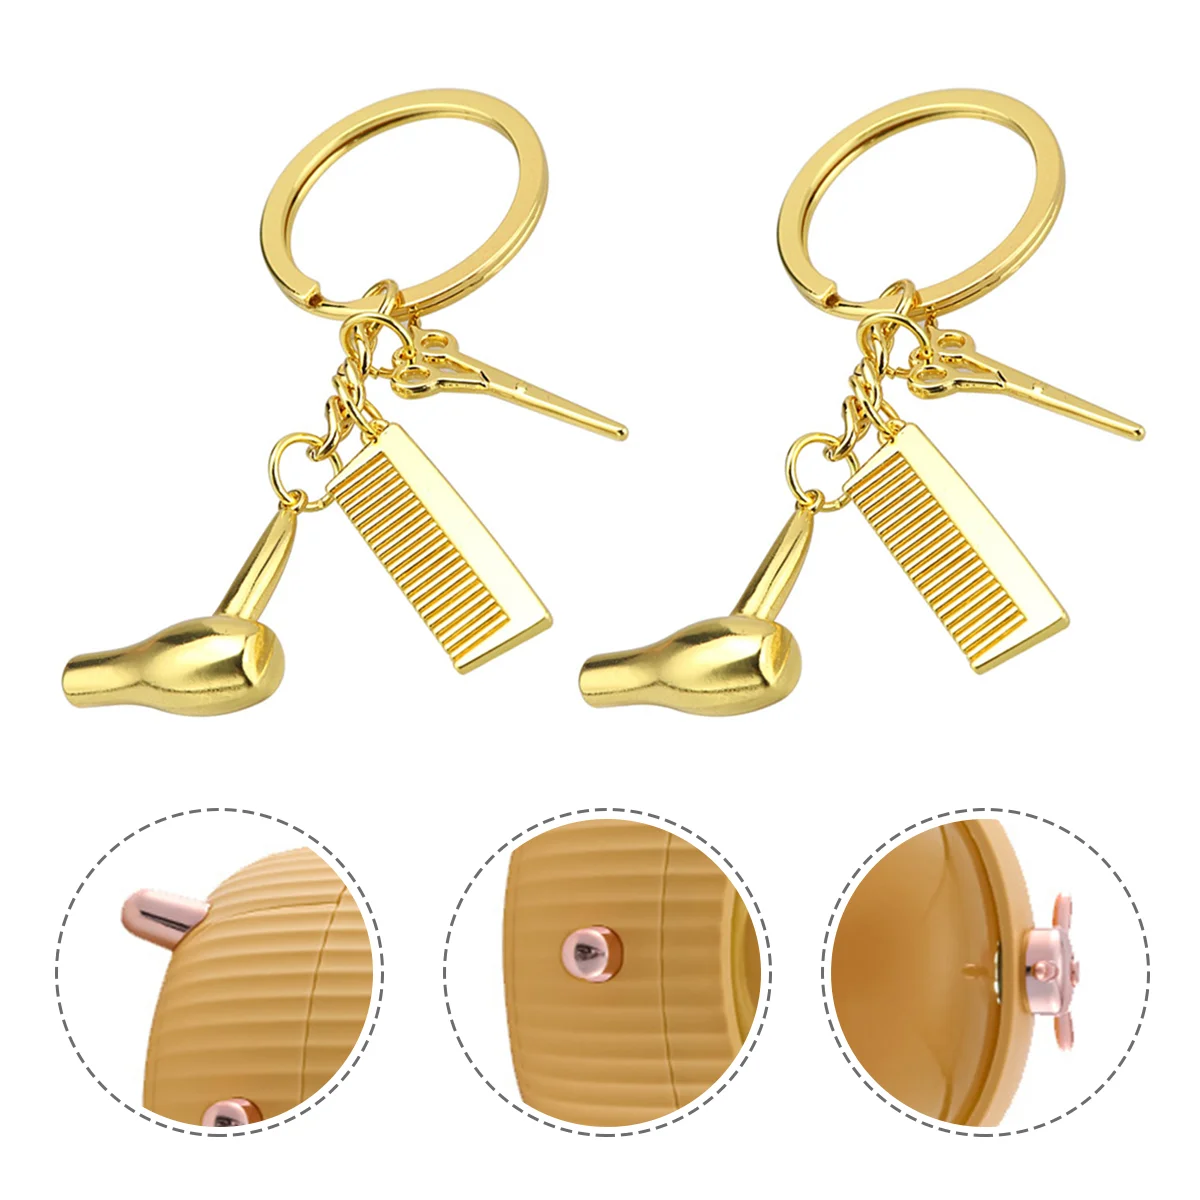 

Keychain Key Hairdresser Hair Gift Ring Pendant Hairdressing Barber Stylist Dryer Comb Funny Keychains Friend Charm Jewelry